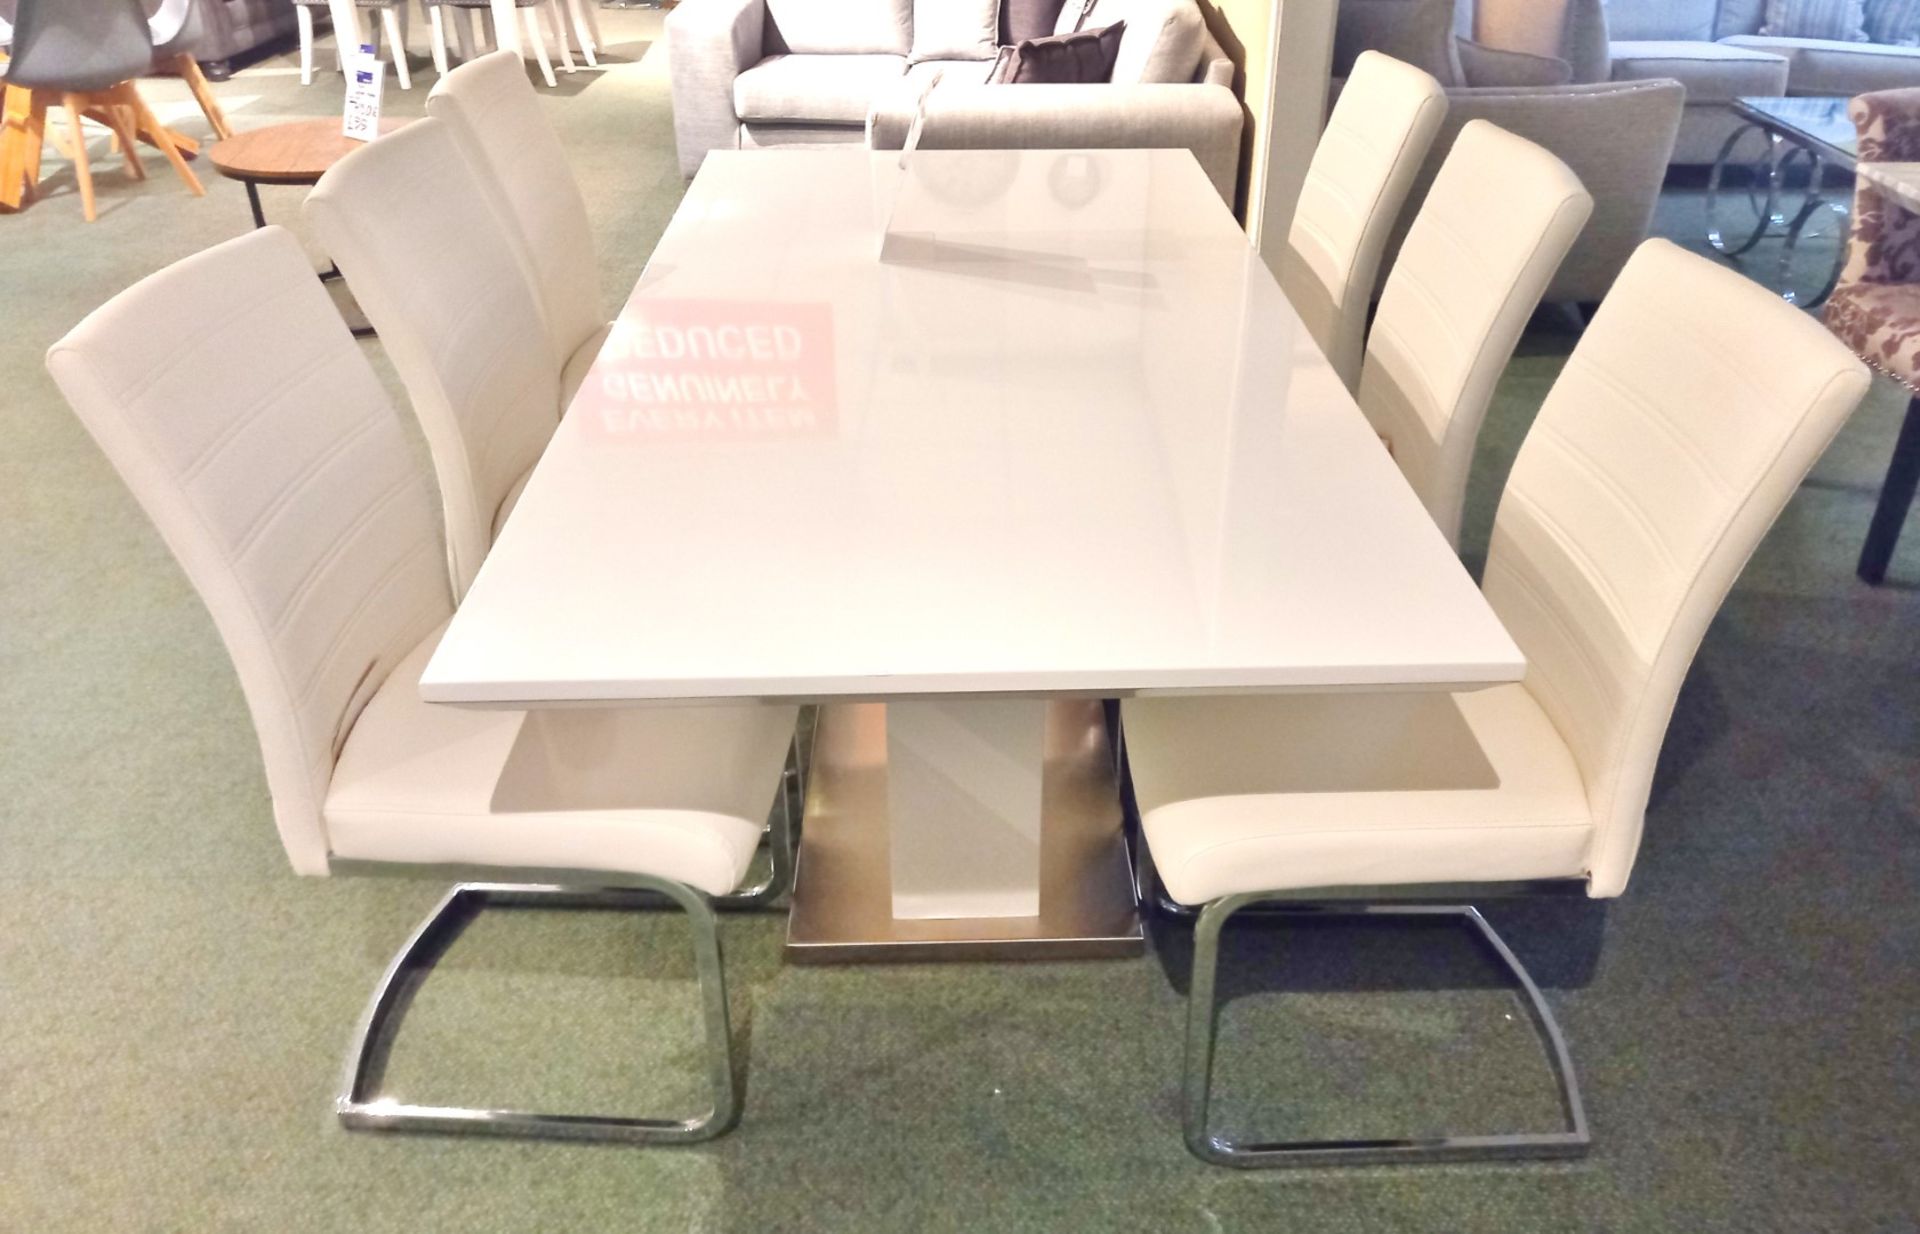 White Gloss Table & 6 Chairs (1800 x 900) Rrp. £999 - Image 2 of 7